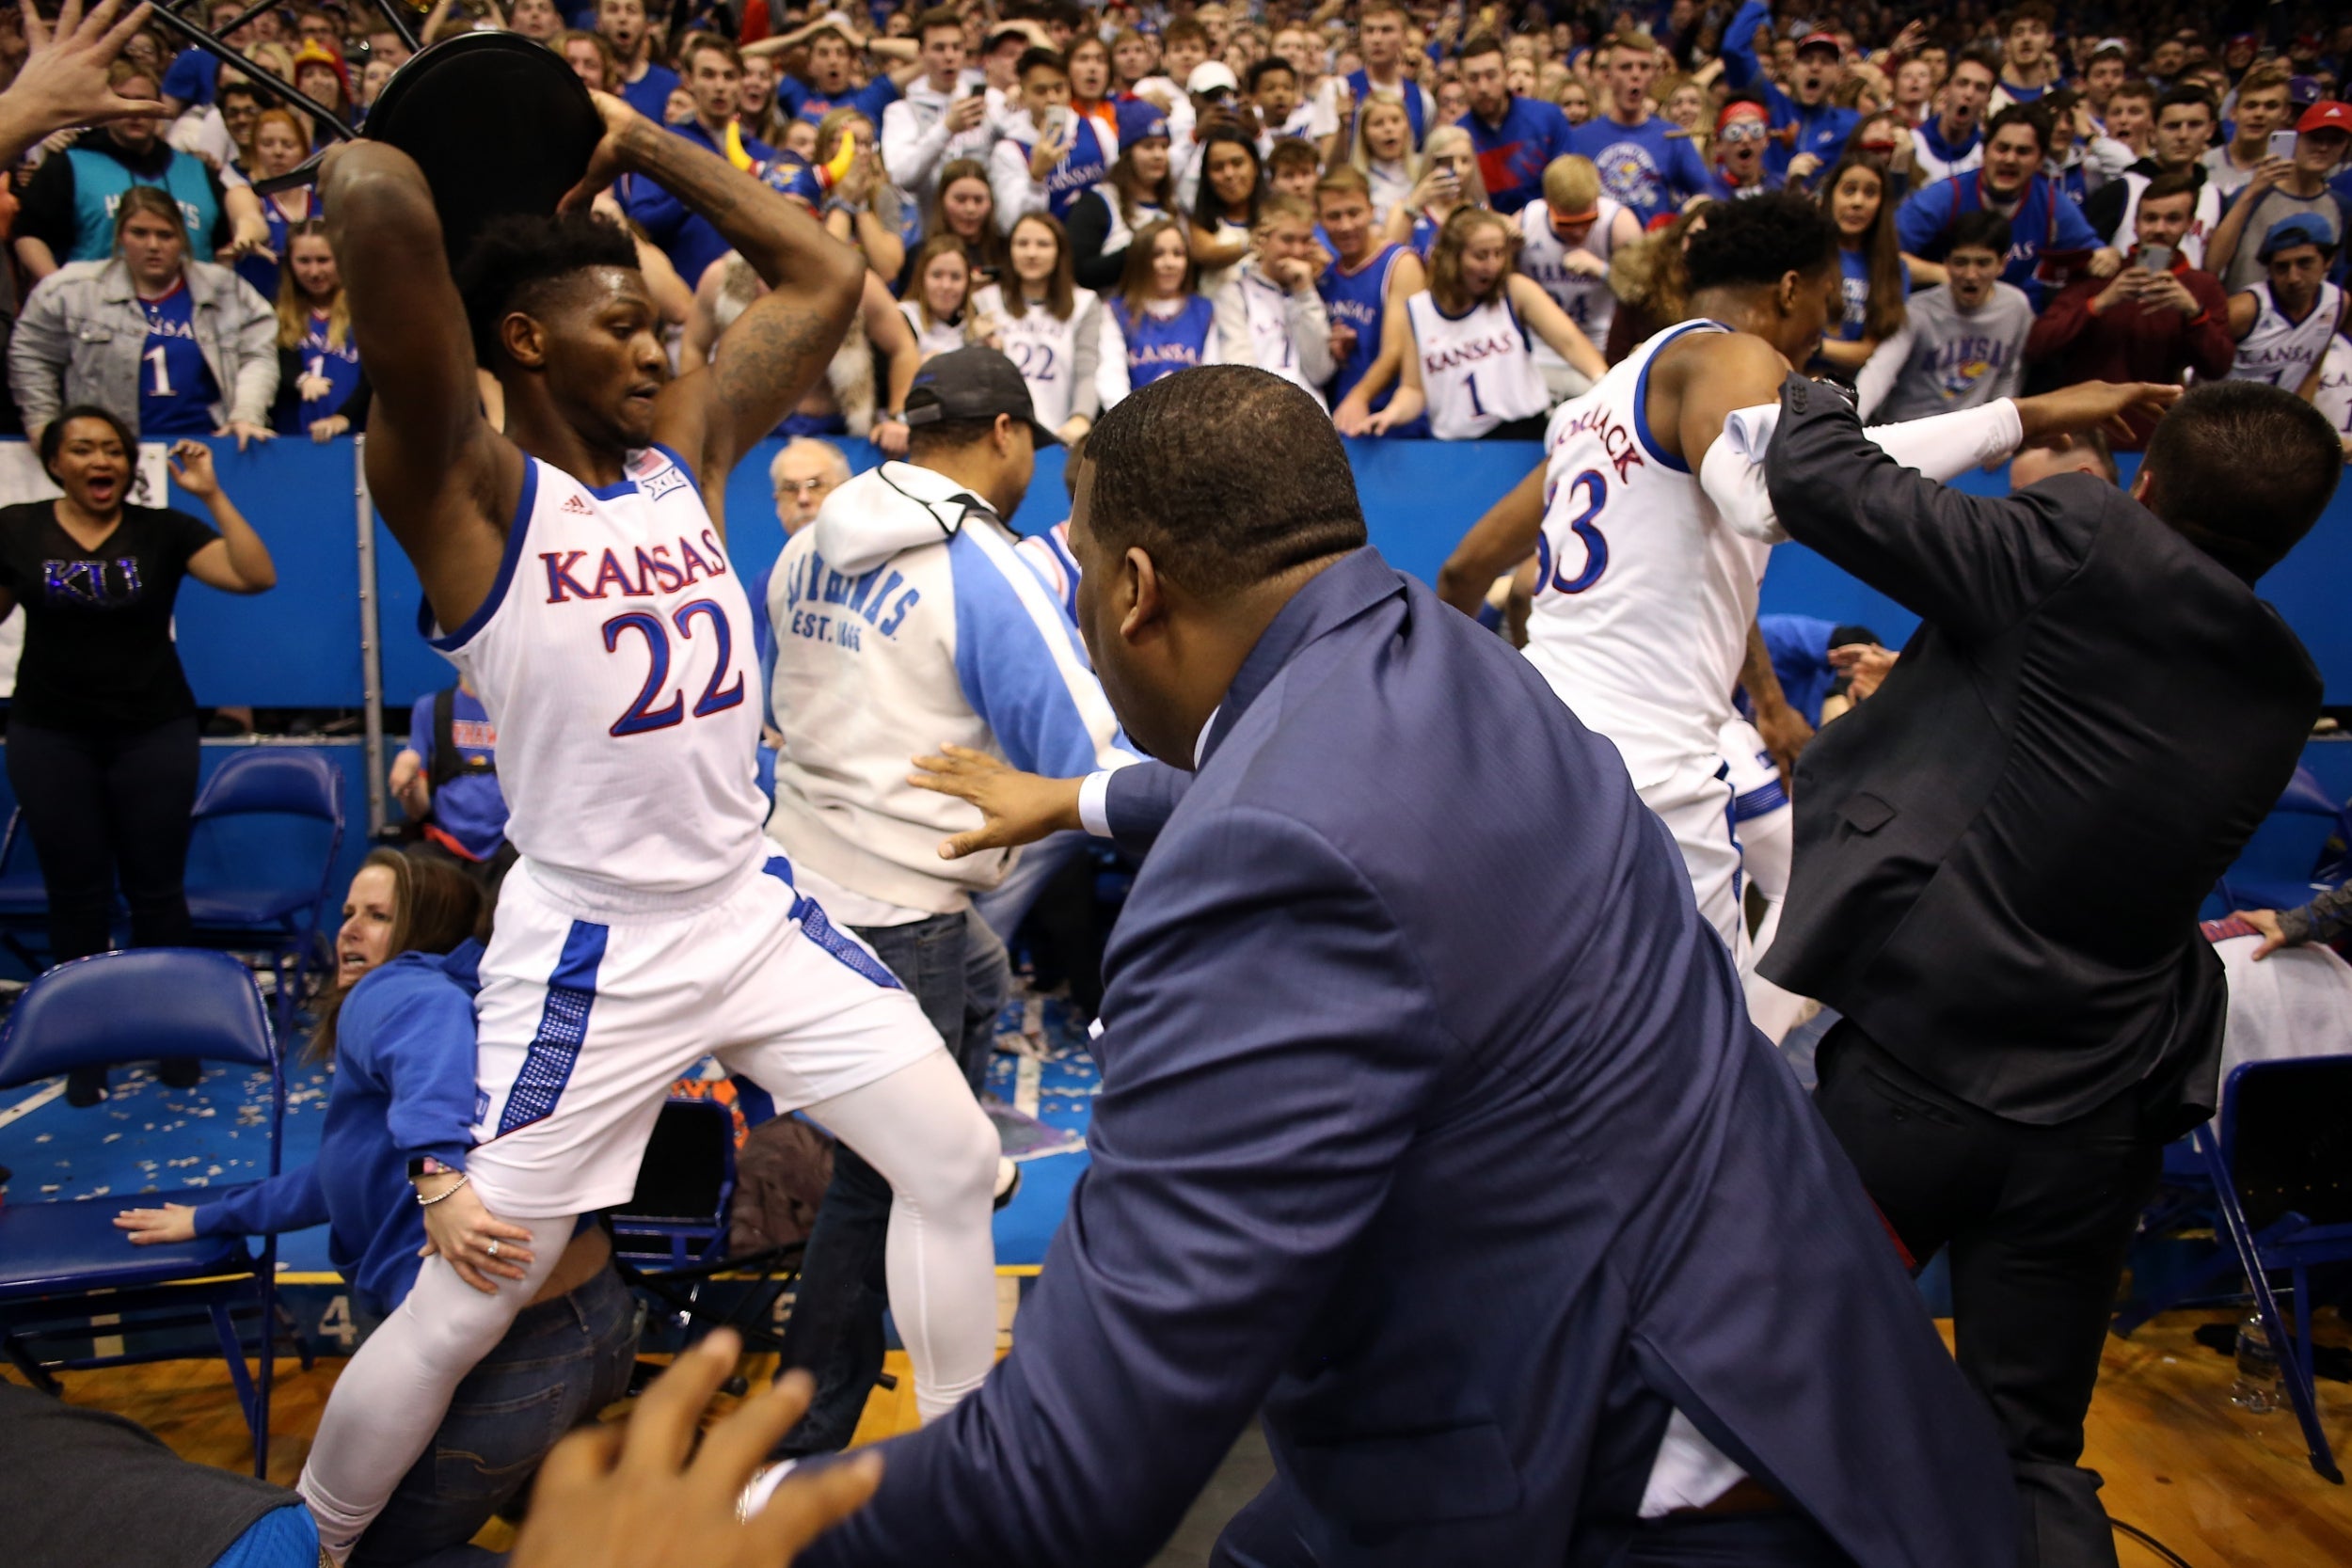 As bad as it gets Brawl breaks out at Kansas-Kansas State basketball game The Independent The Independent